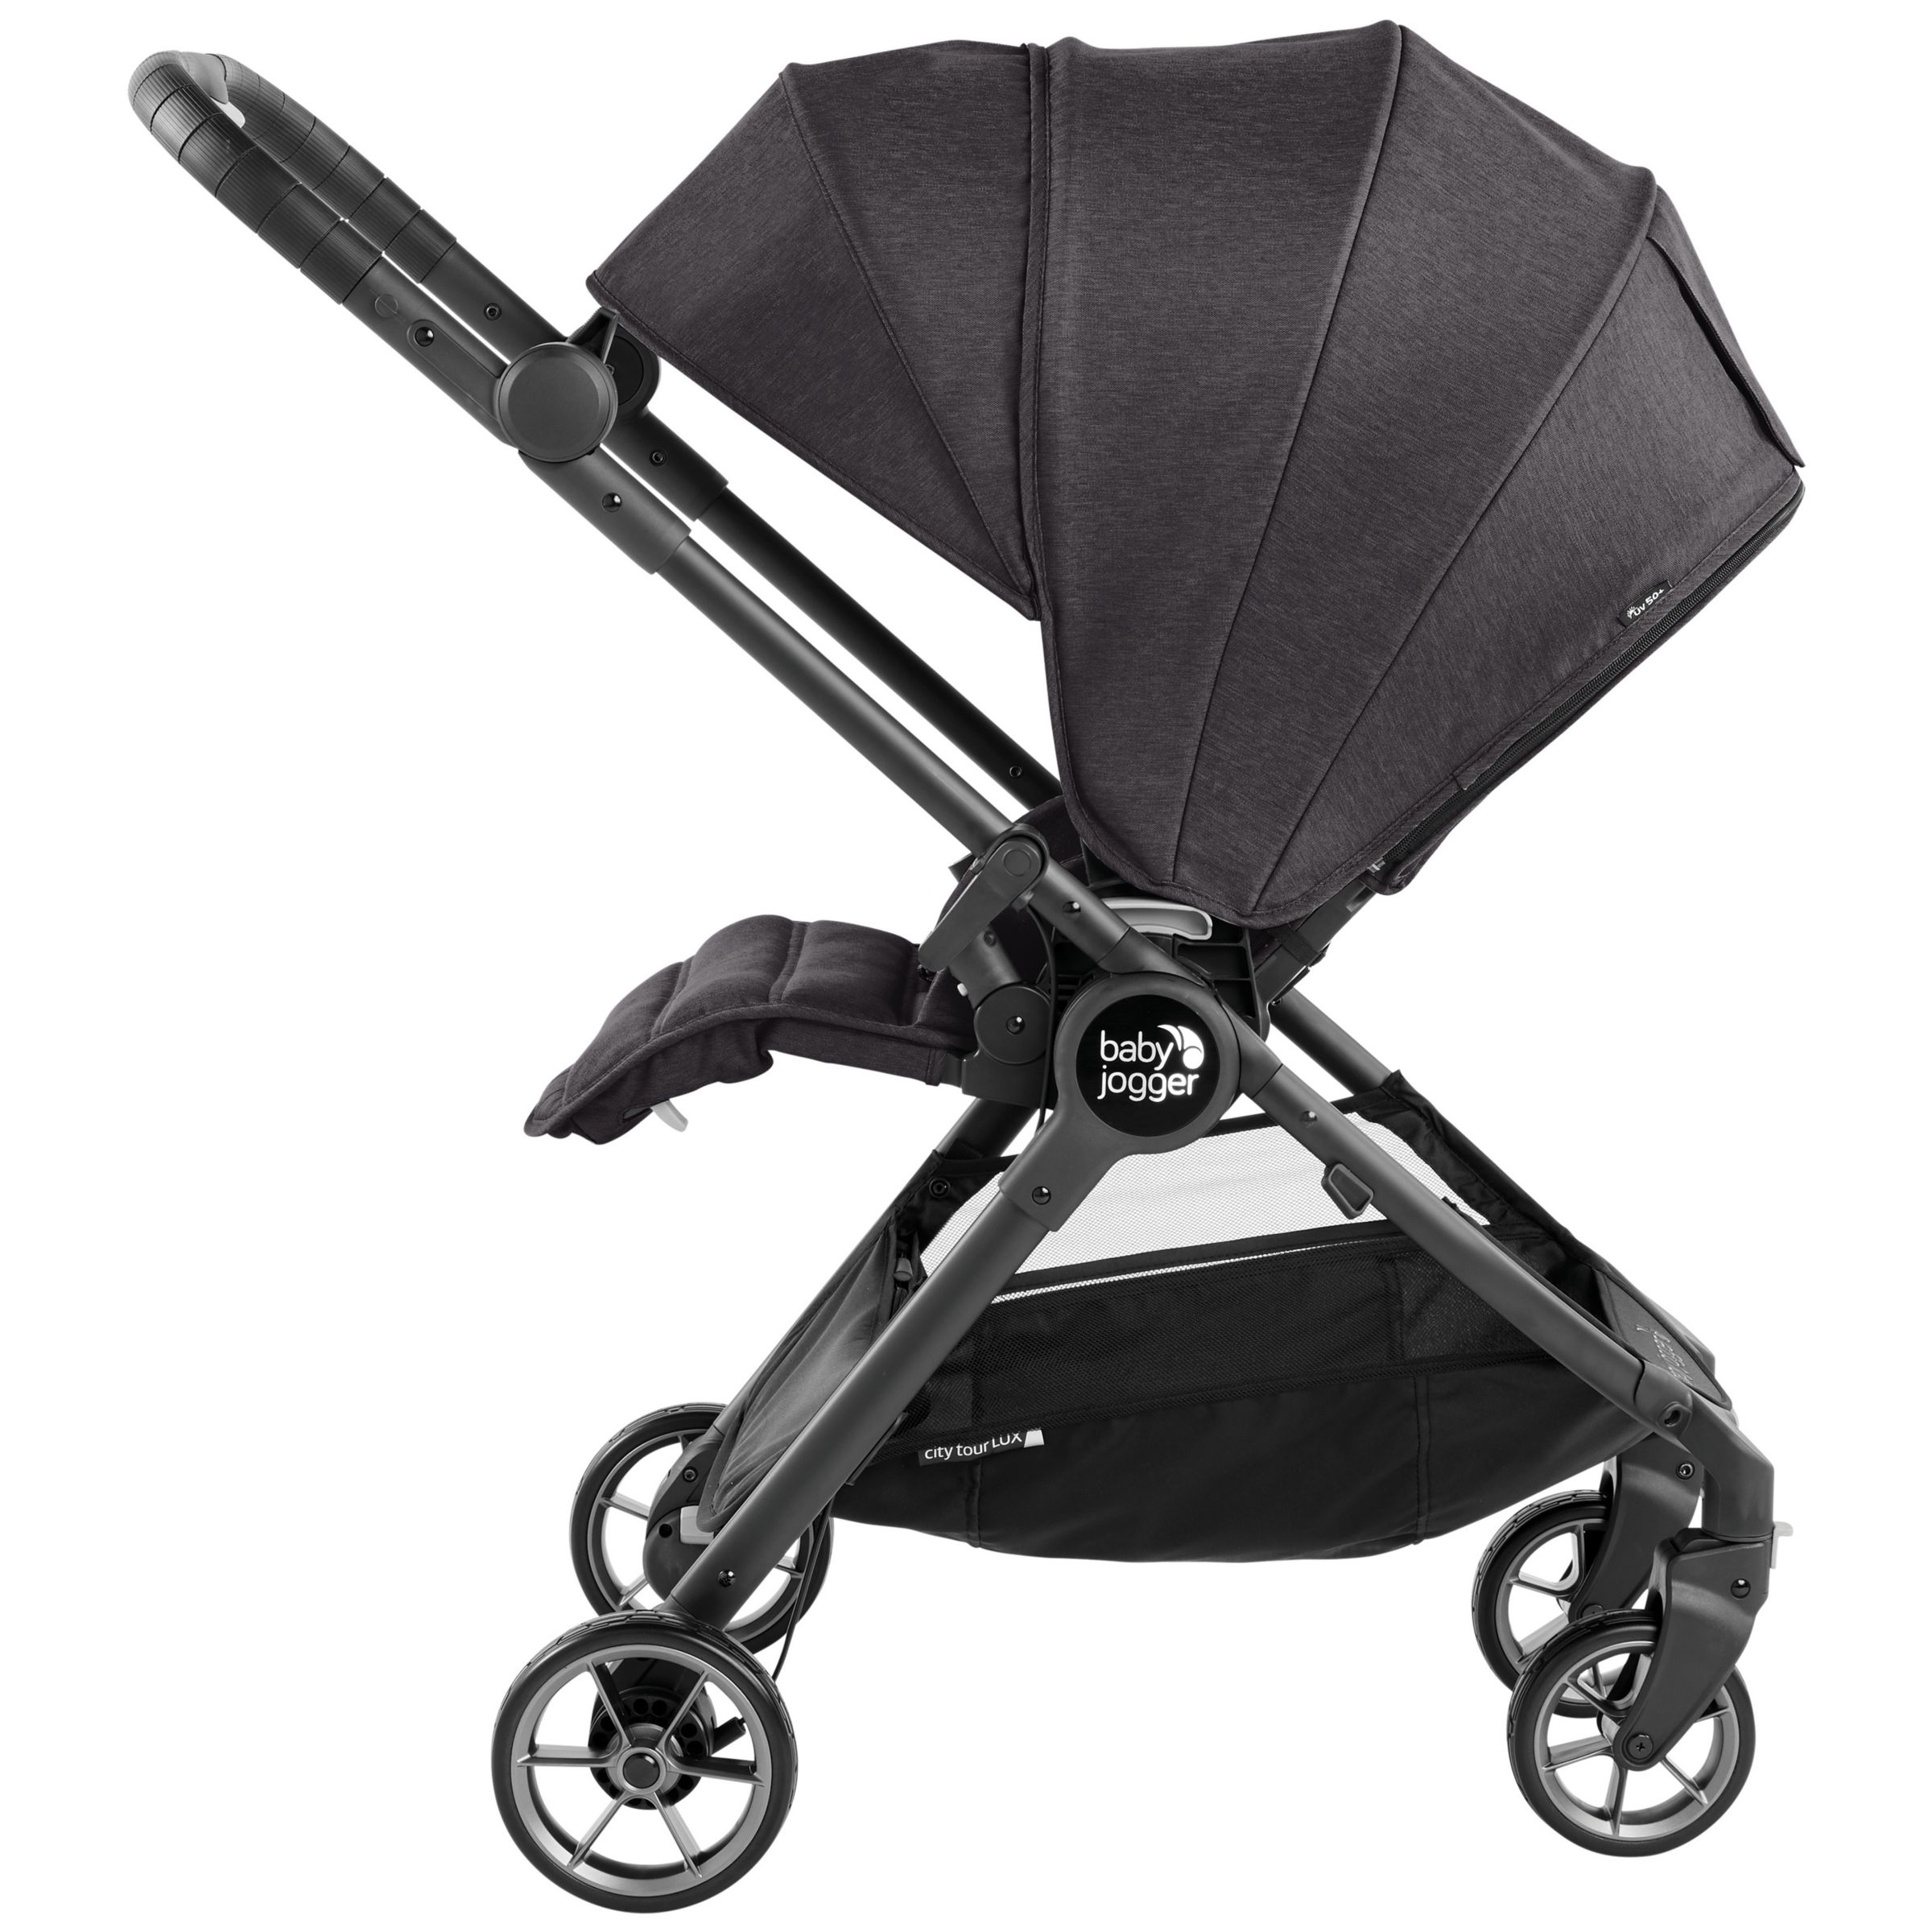 baby jogger city tour lux pushchair